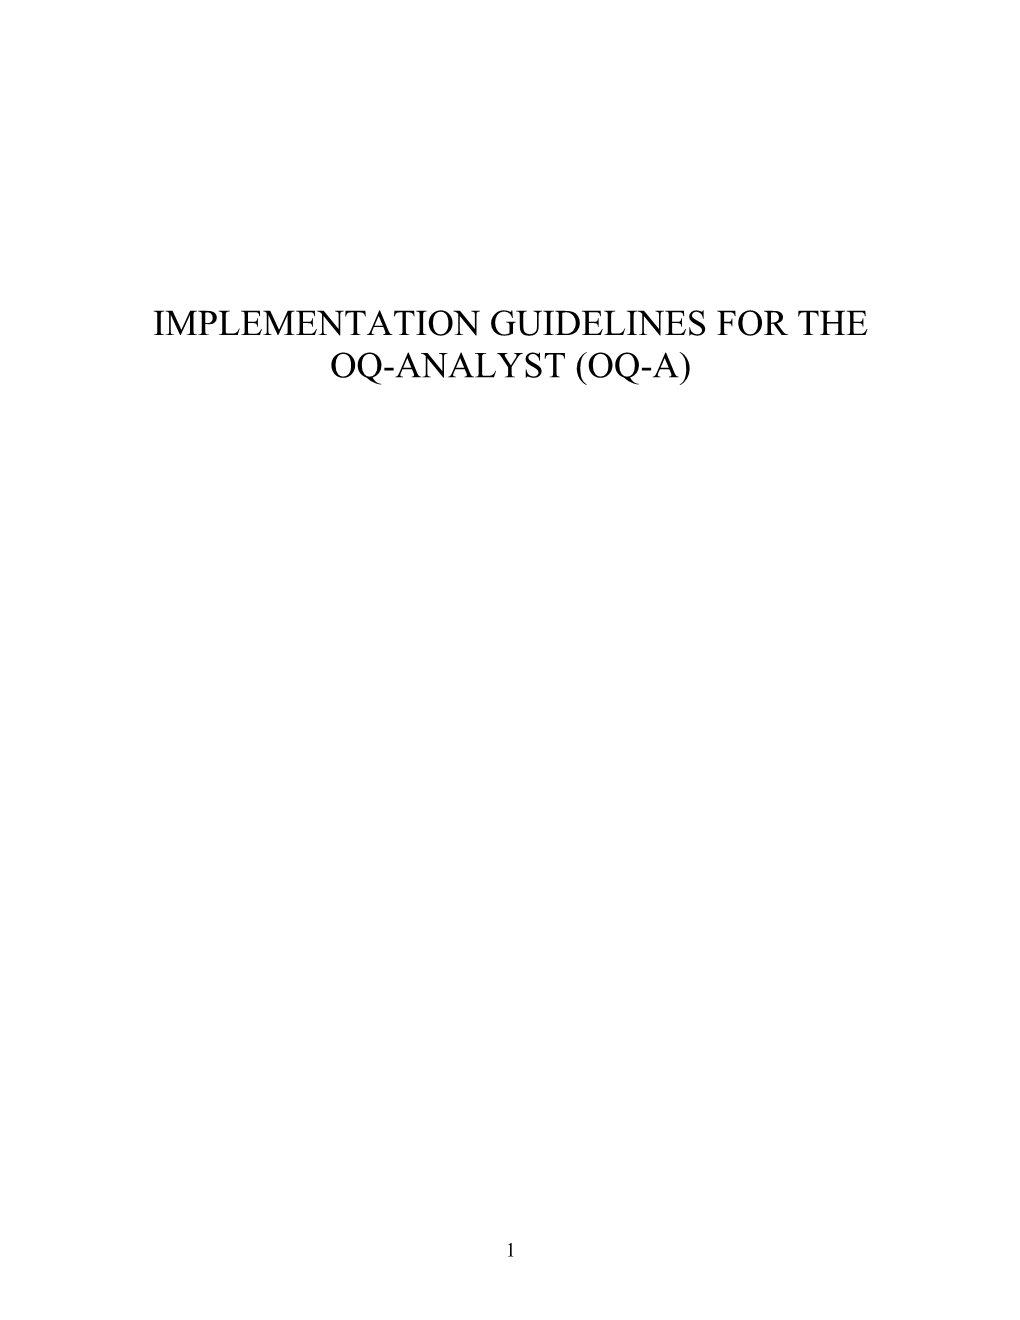 Implementation Guidelines for the Oq-Analyst (Oq-A)